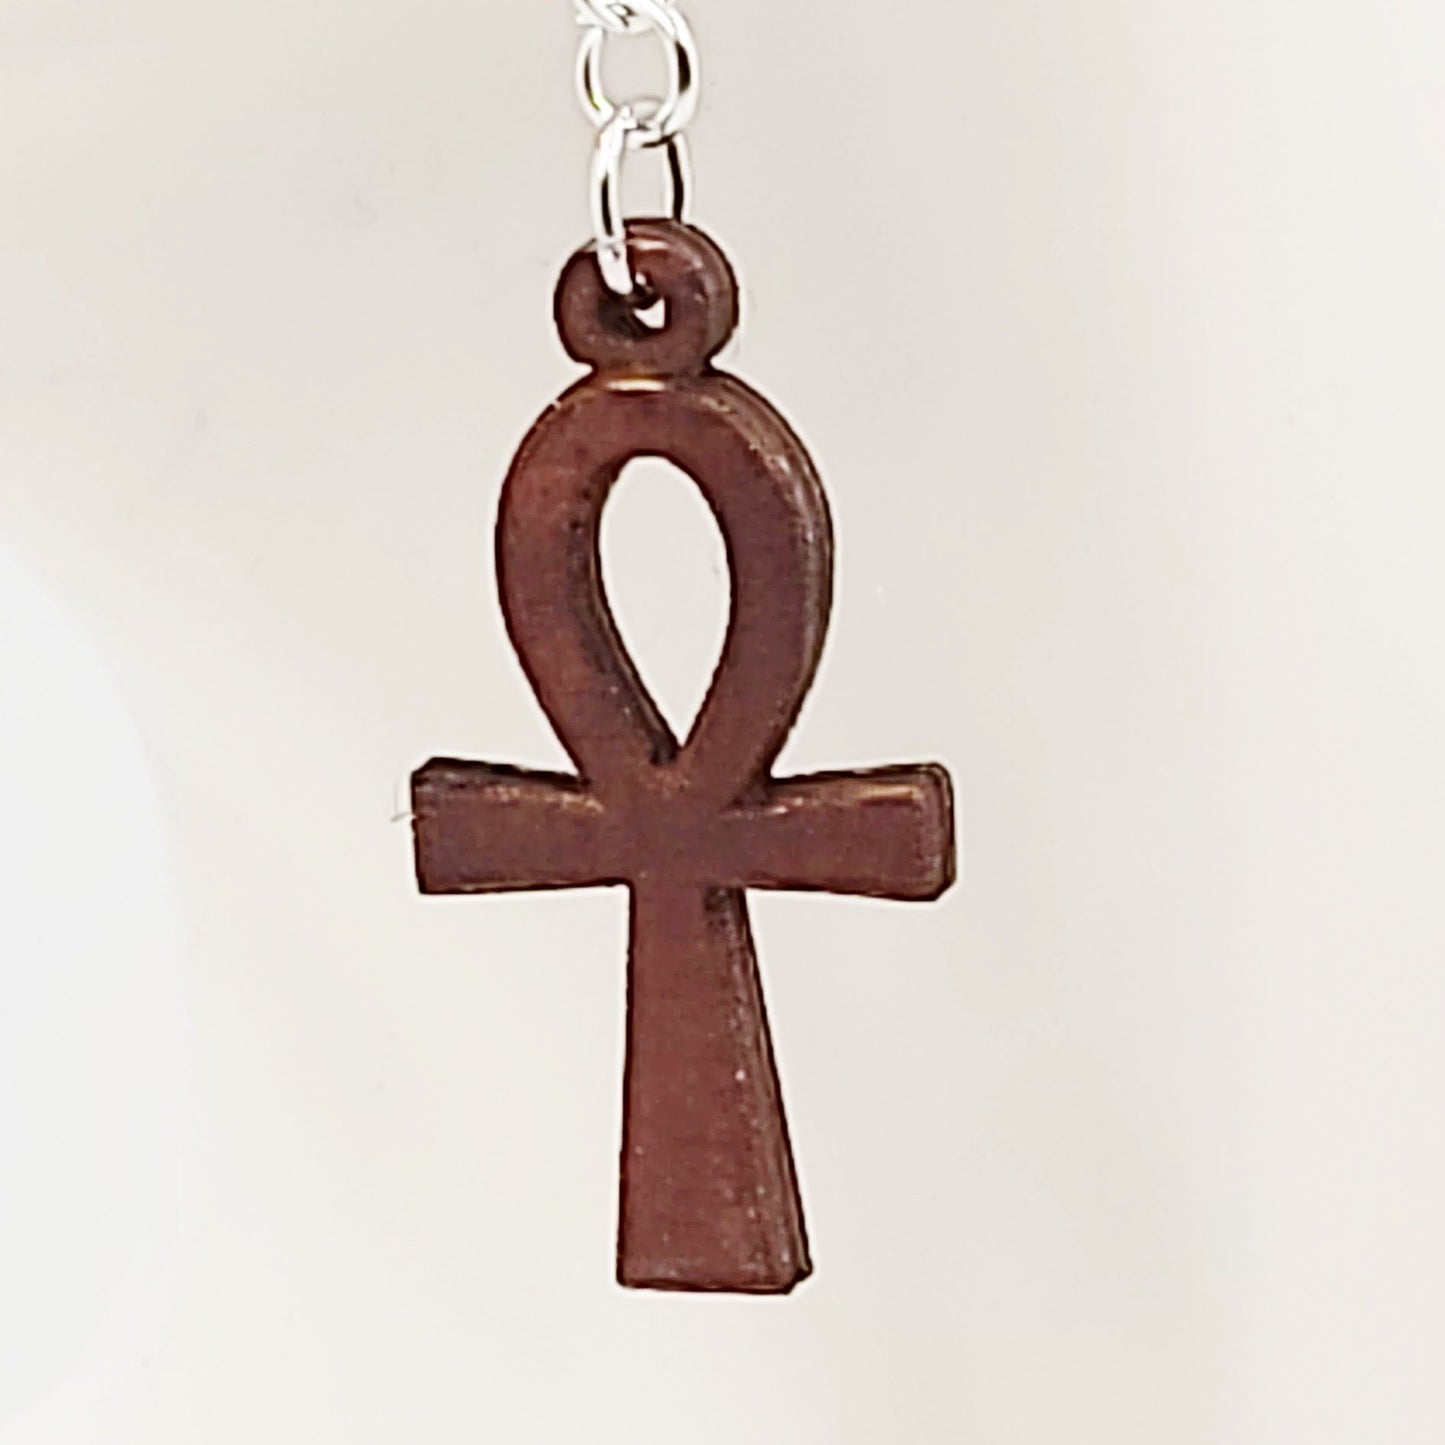 Wood Ankh Earrings Sterling Silver Dangle - Elevated Metaphysical